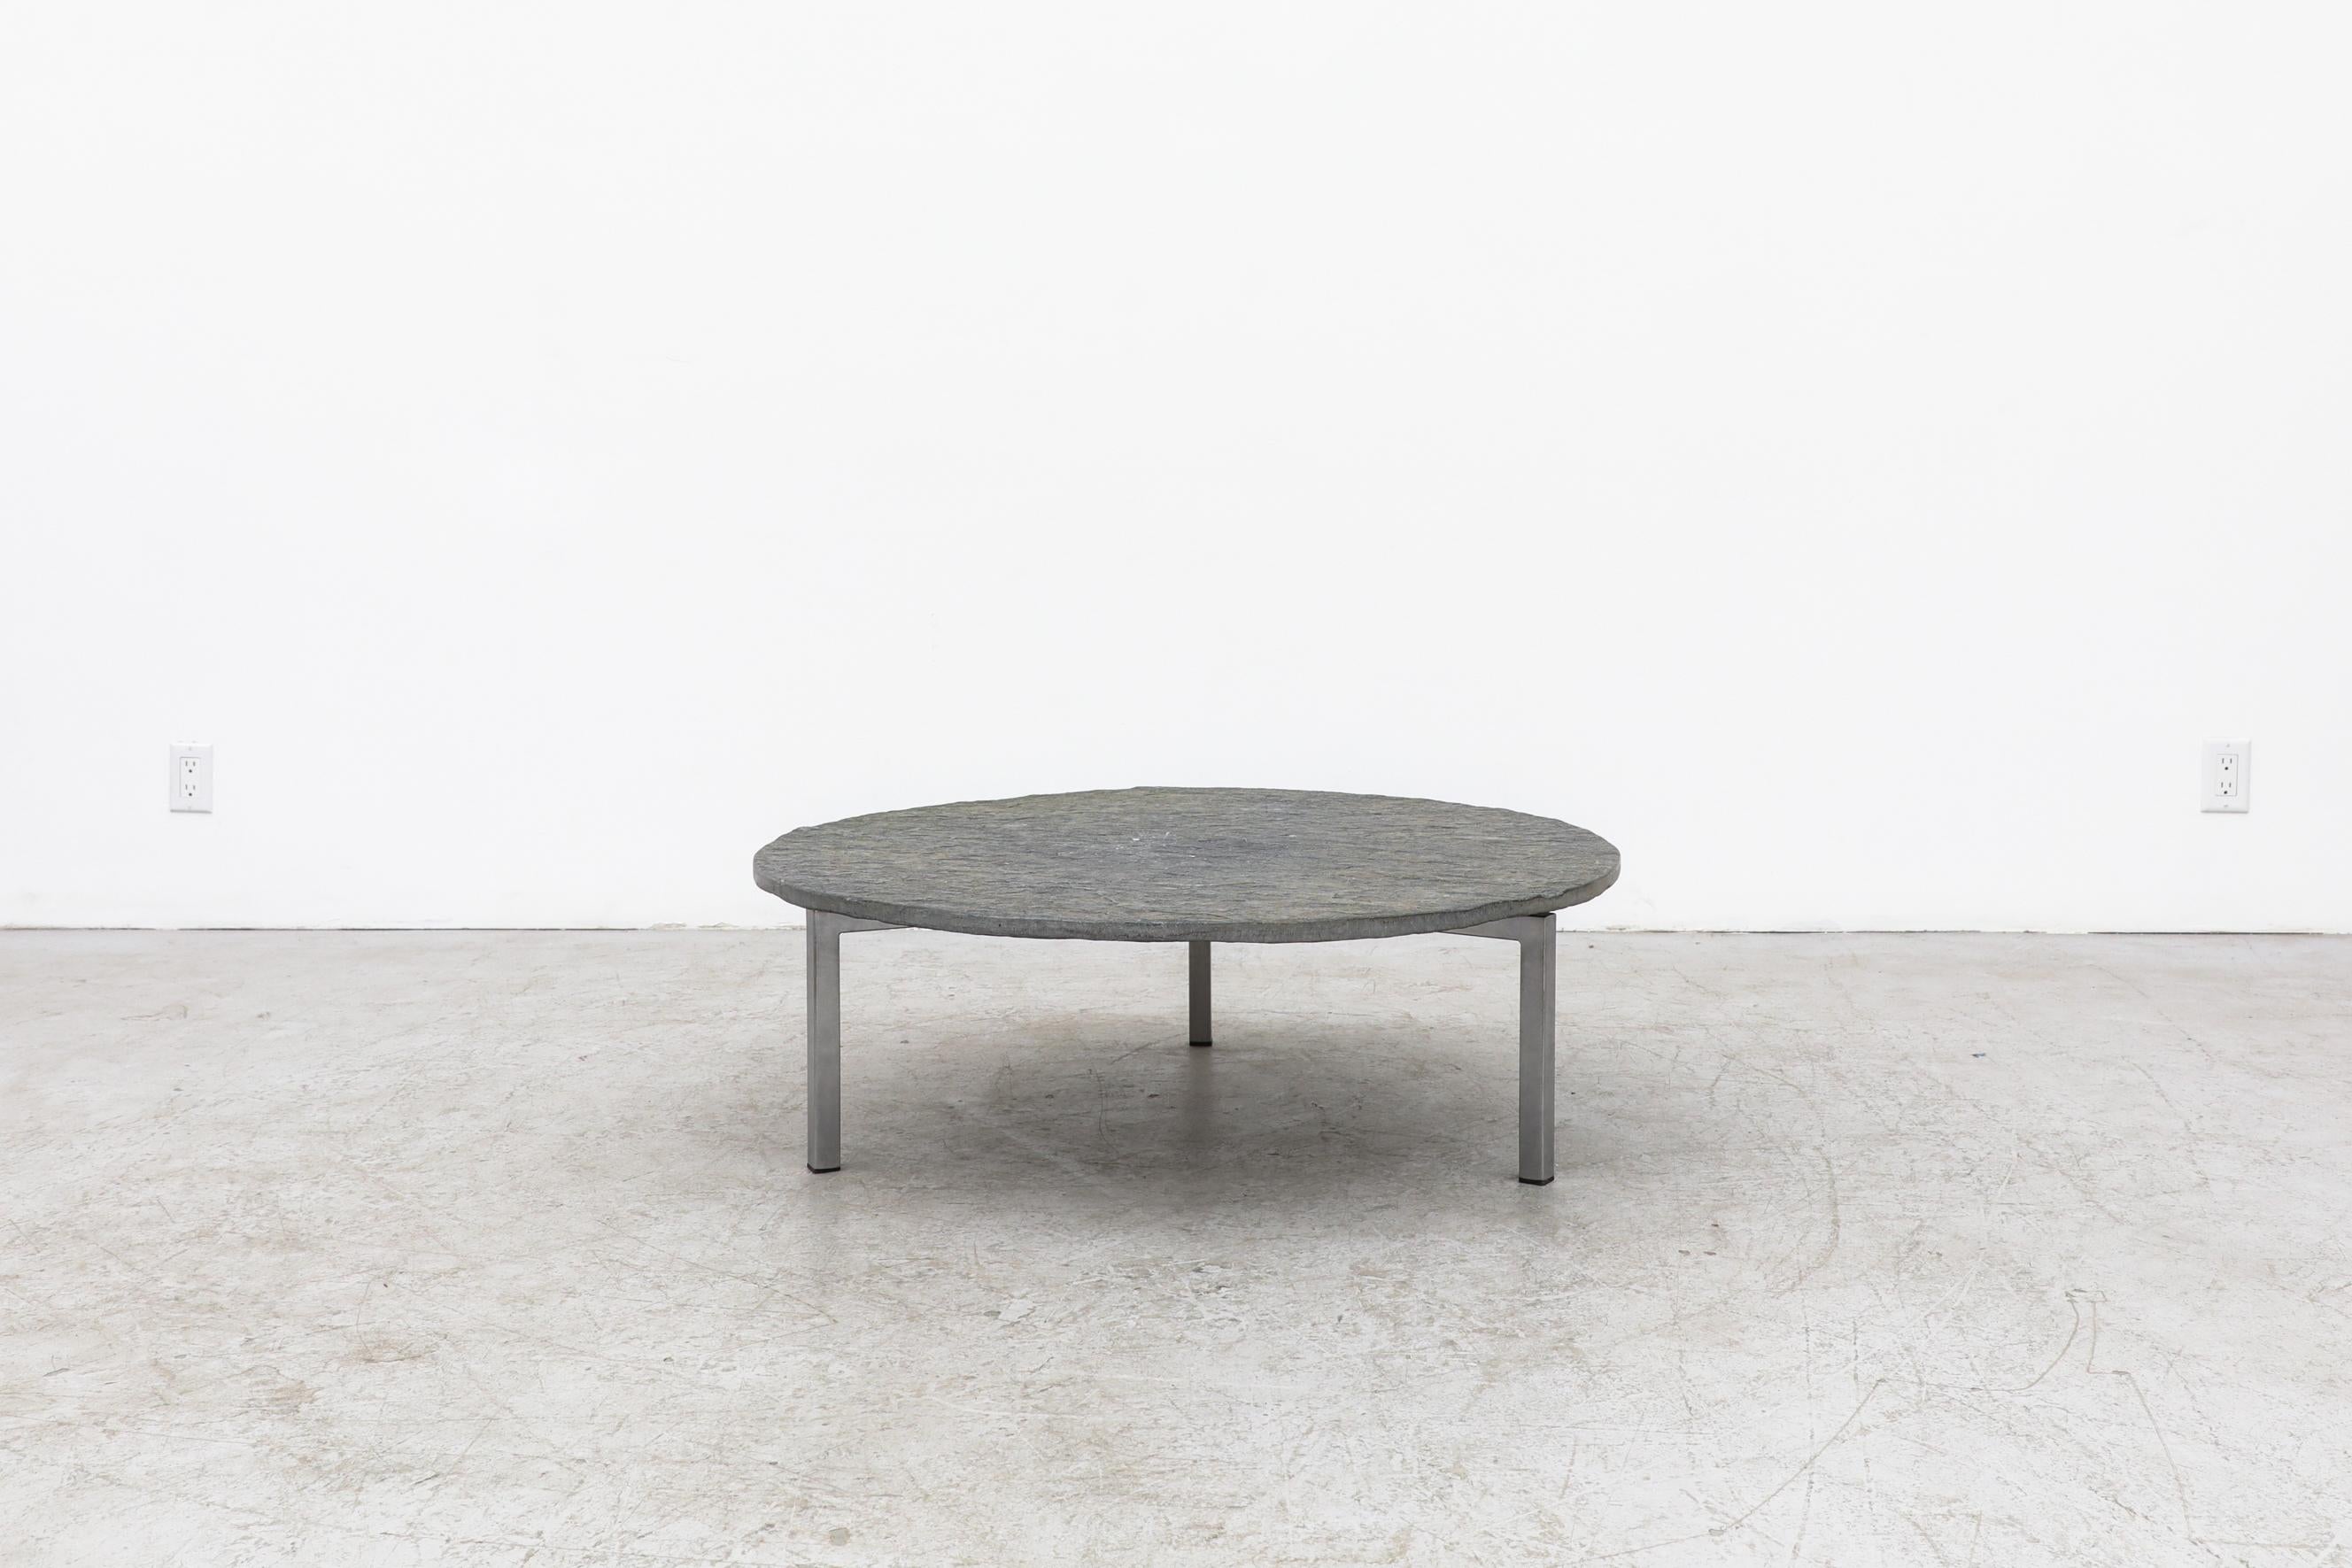 1970's, Stunning brutalist stone side or coffee table with a flat chrome tripod base. The top has a small hole through the center of it. There are bolts in the frame top which act as leveling tools. In original condition with visible patina and